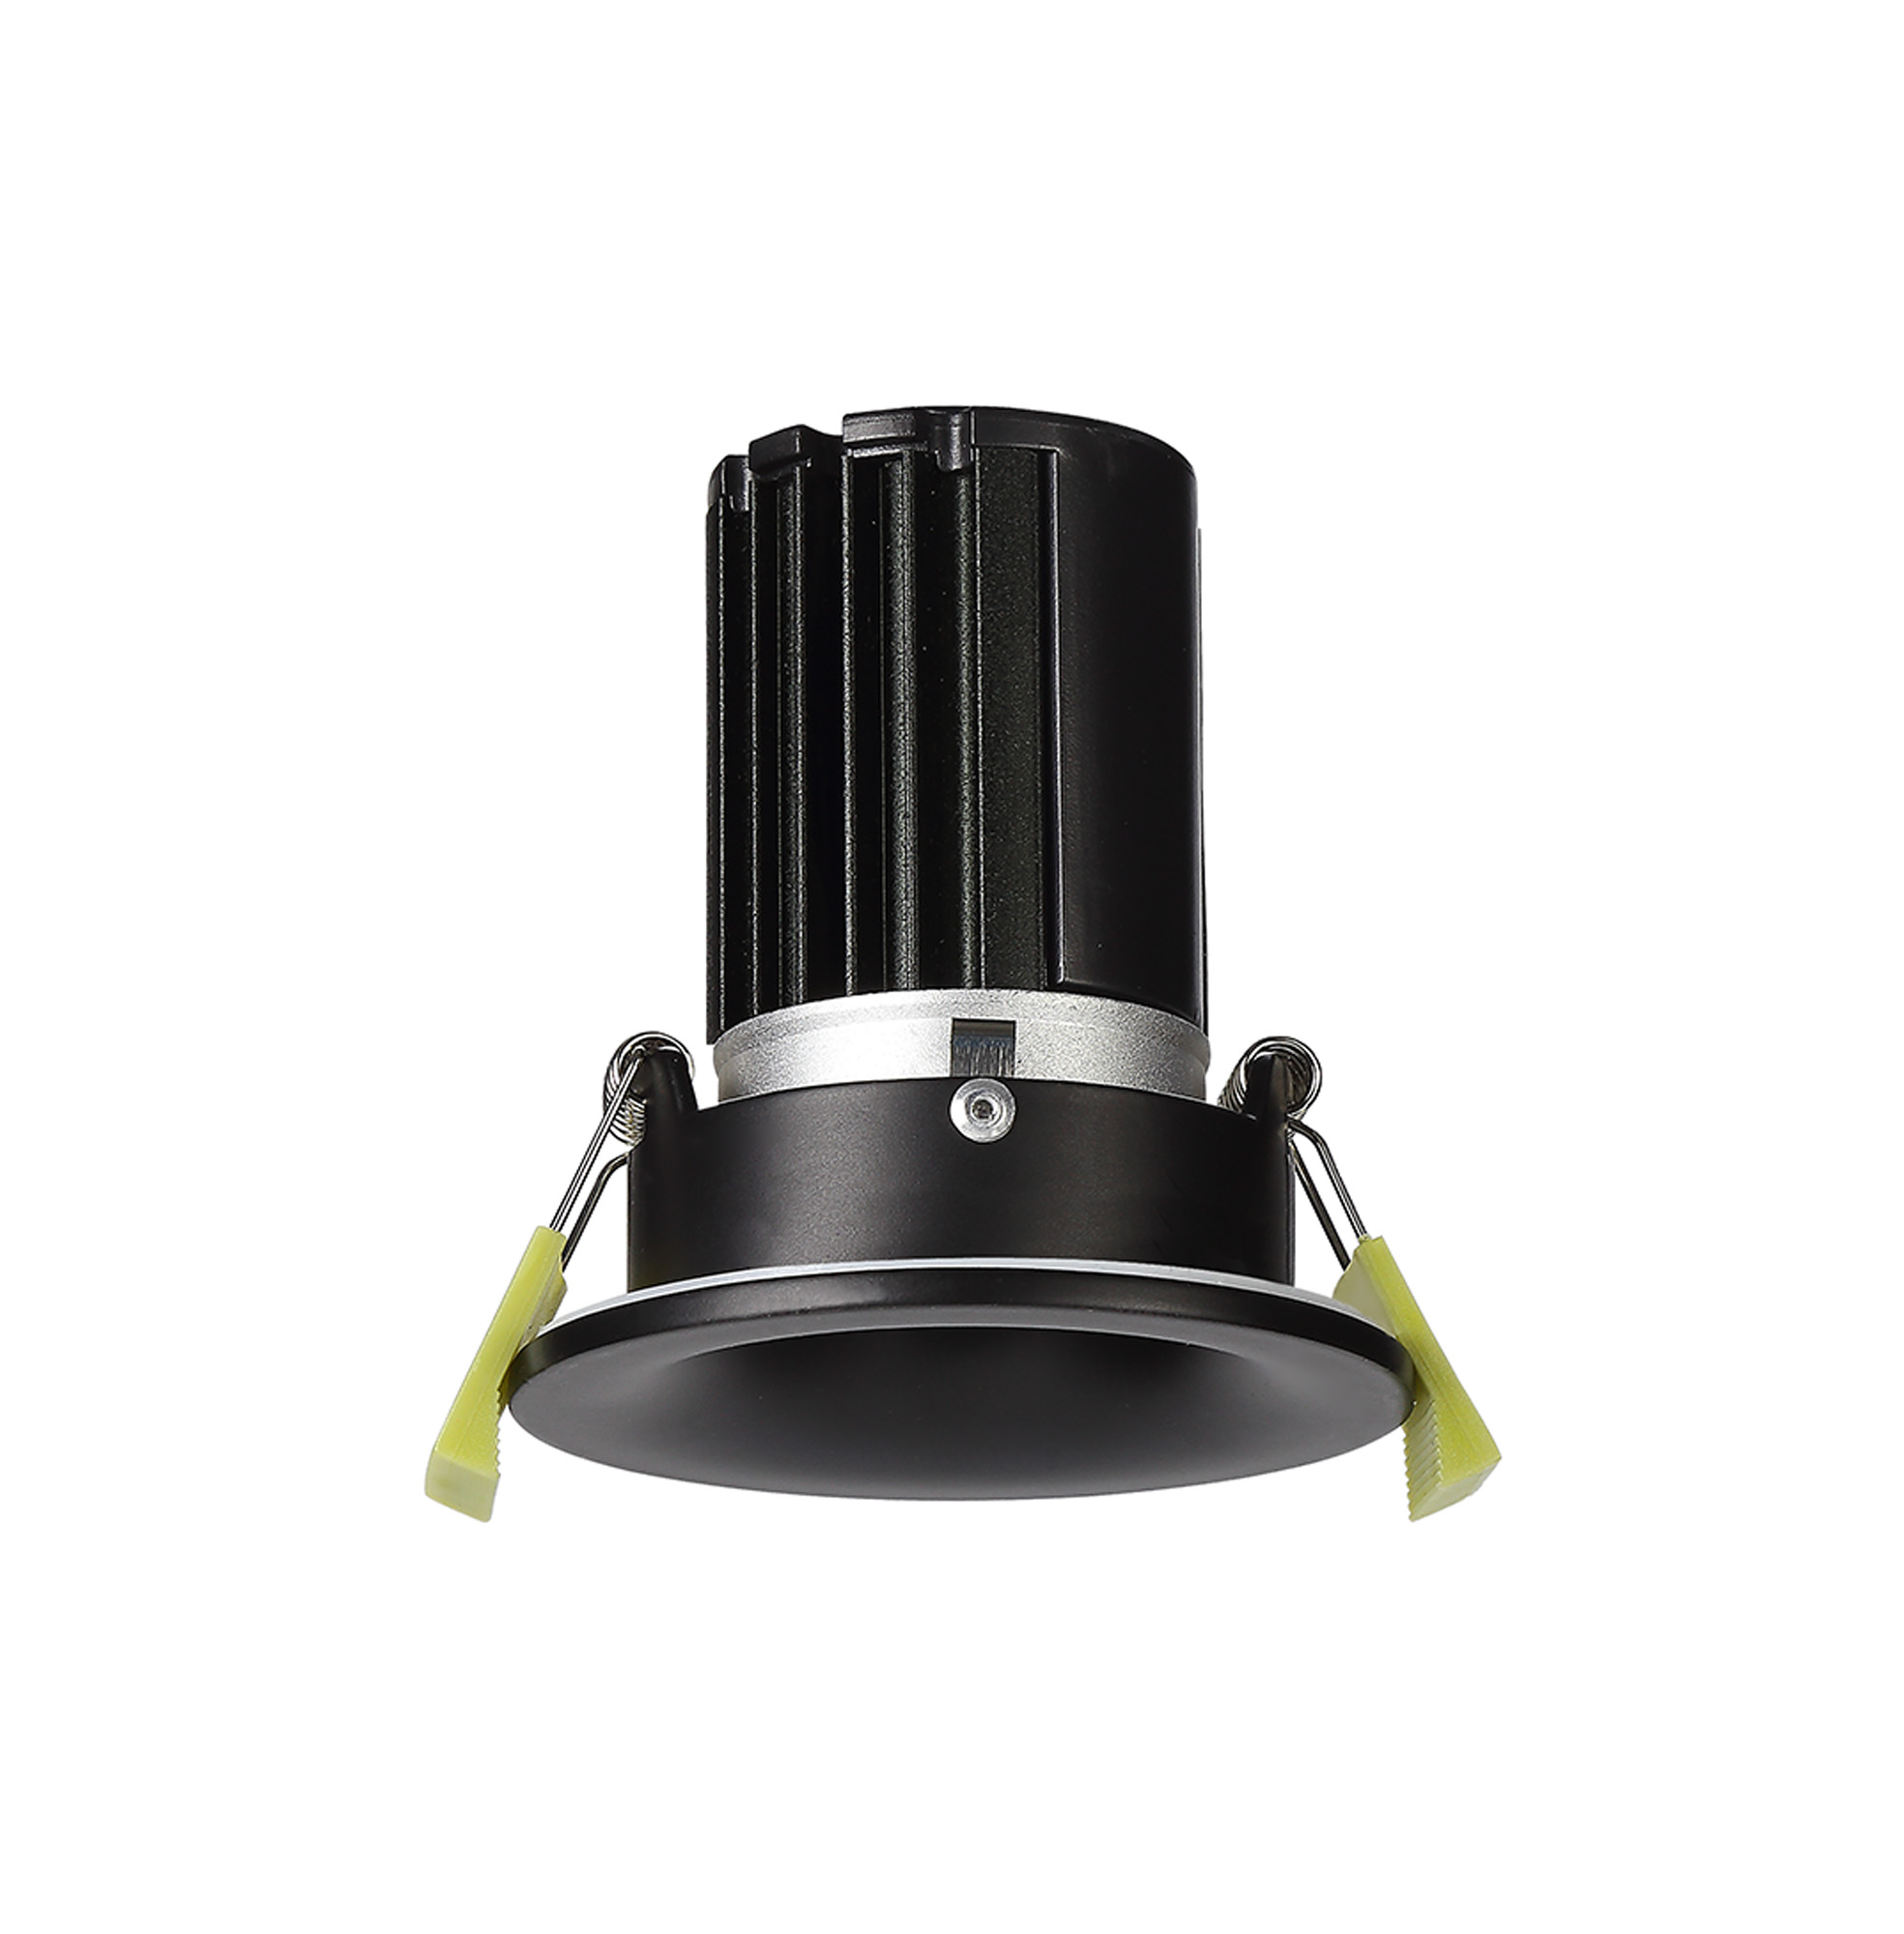 DM201530  Bruve 12 Tridonic powered 12W 2700K 1200lm 12° LED Engine,350mA , CRI>90 LED Engine Matt Black Fixed Round Recessed Downlight, Inner Glass cover, IP65